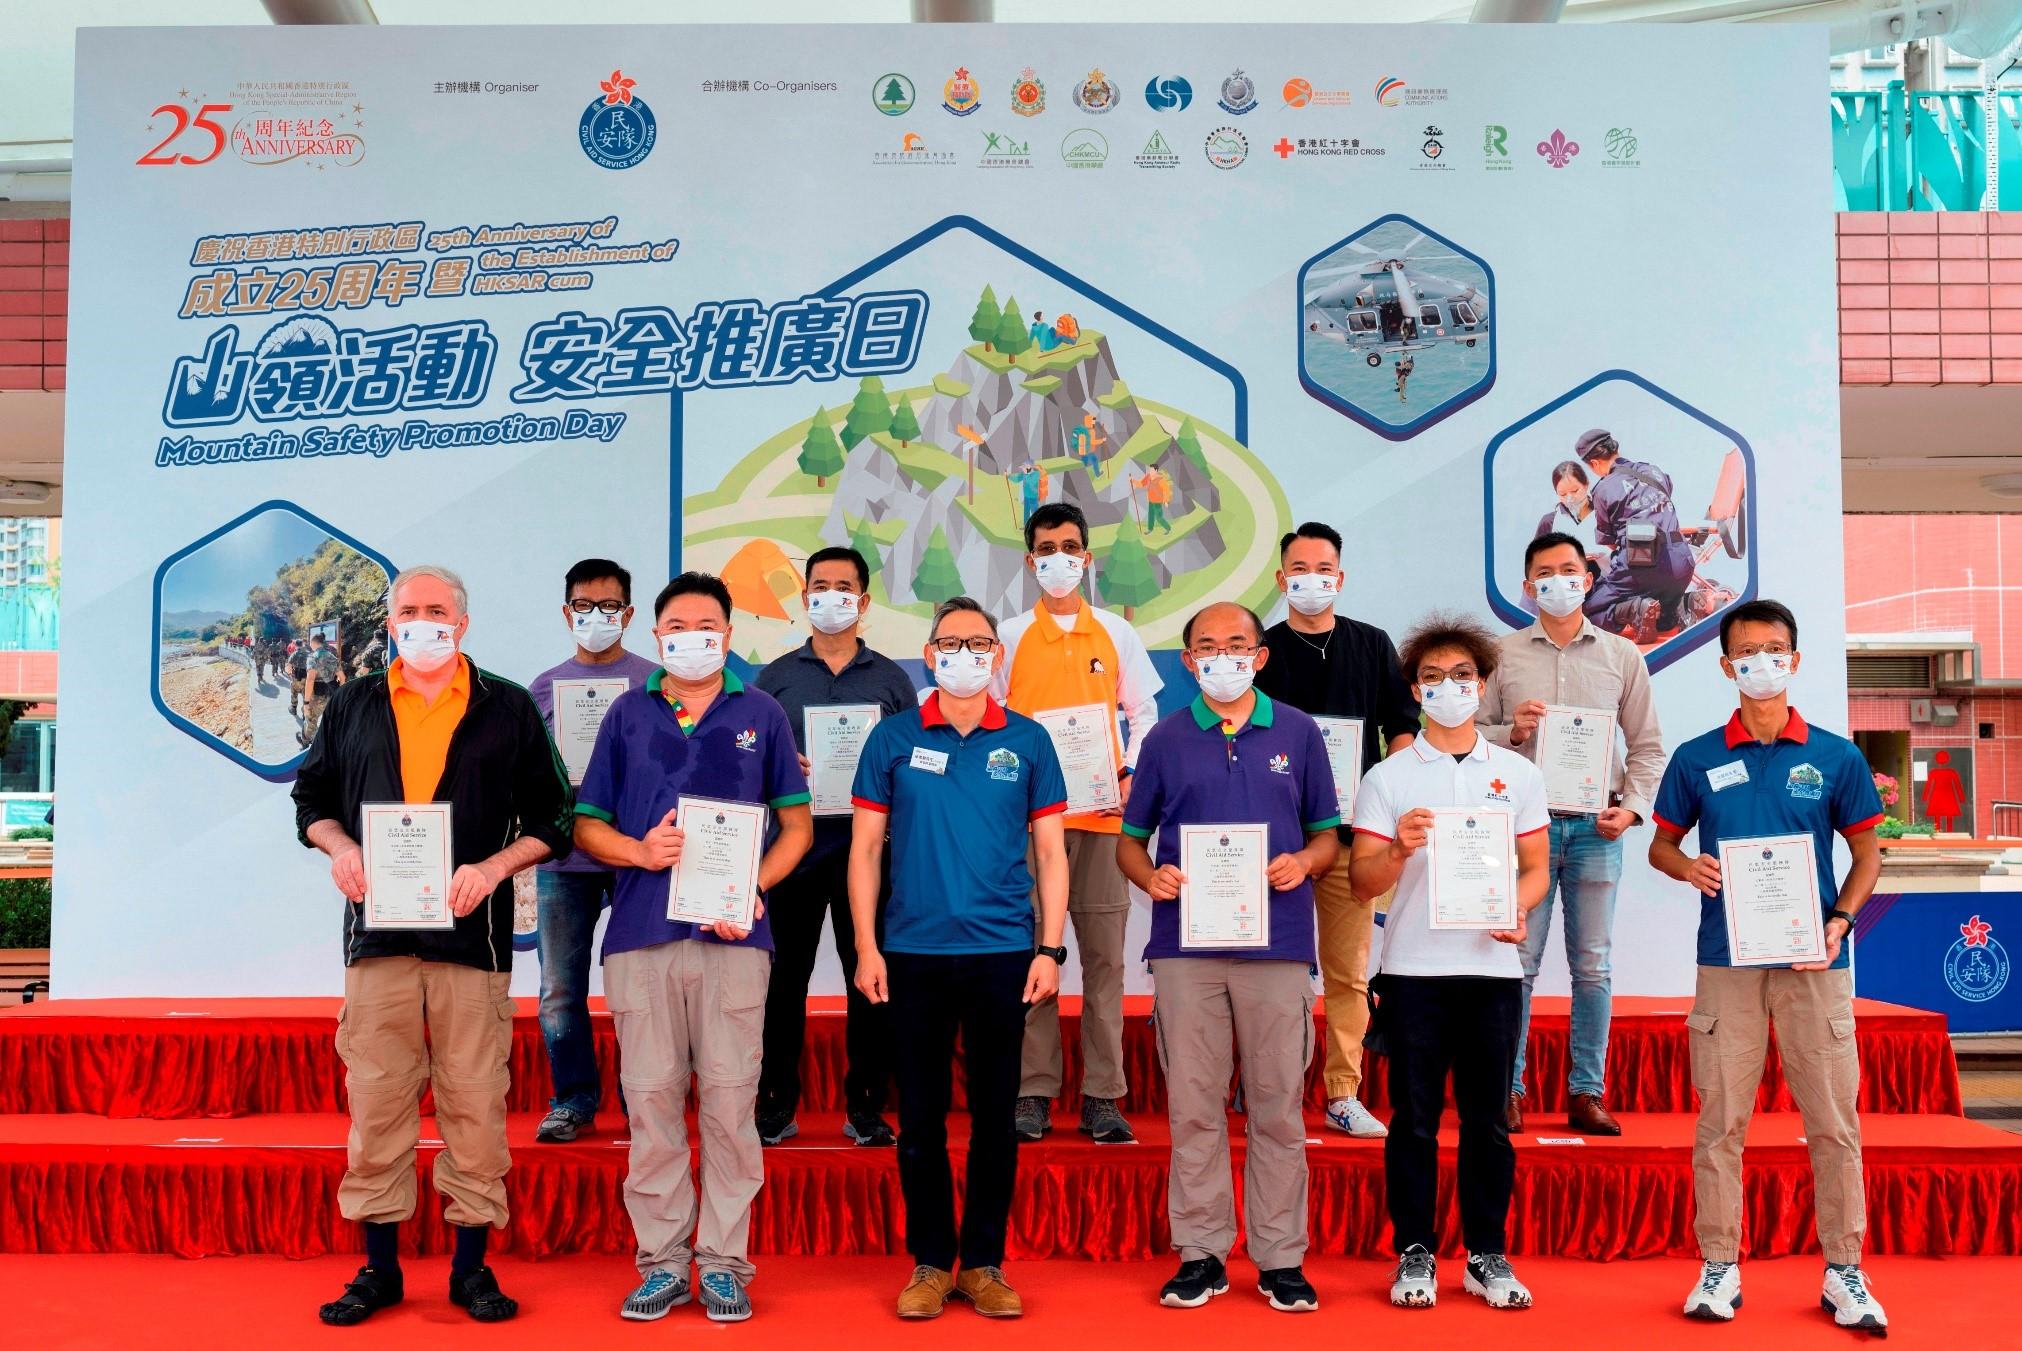 The Civil Aid Service held the 25th Anniversary of the Establishment of HKSAR cum Mountain Safety Promotion Day with various government departments and mountaineering organisations today (October 23) at Tuen Mun Cultural Square. Photo shows the Under Secretary for Security, Mr Michael Cheuk Hau-yip (front row, third left), presenting certificates to participants of the Mountain Casualty Handling Course.